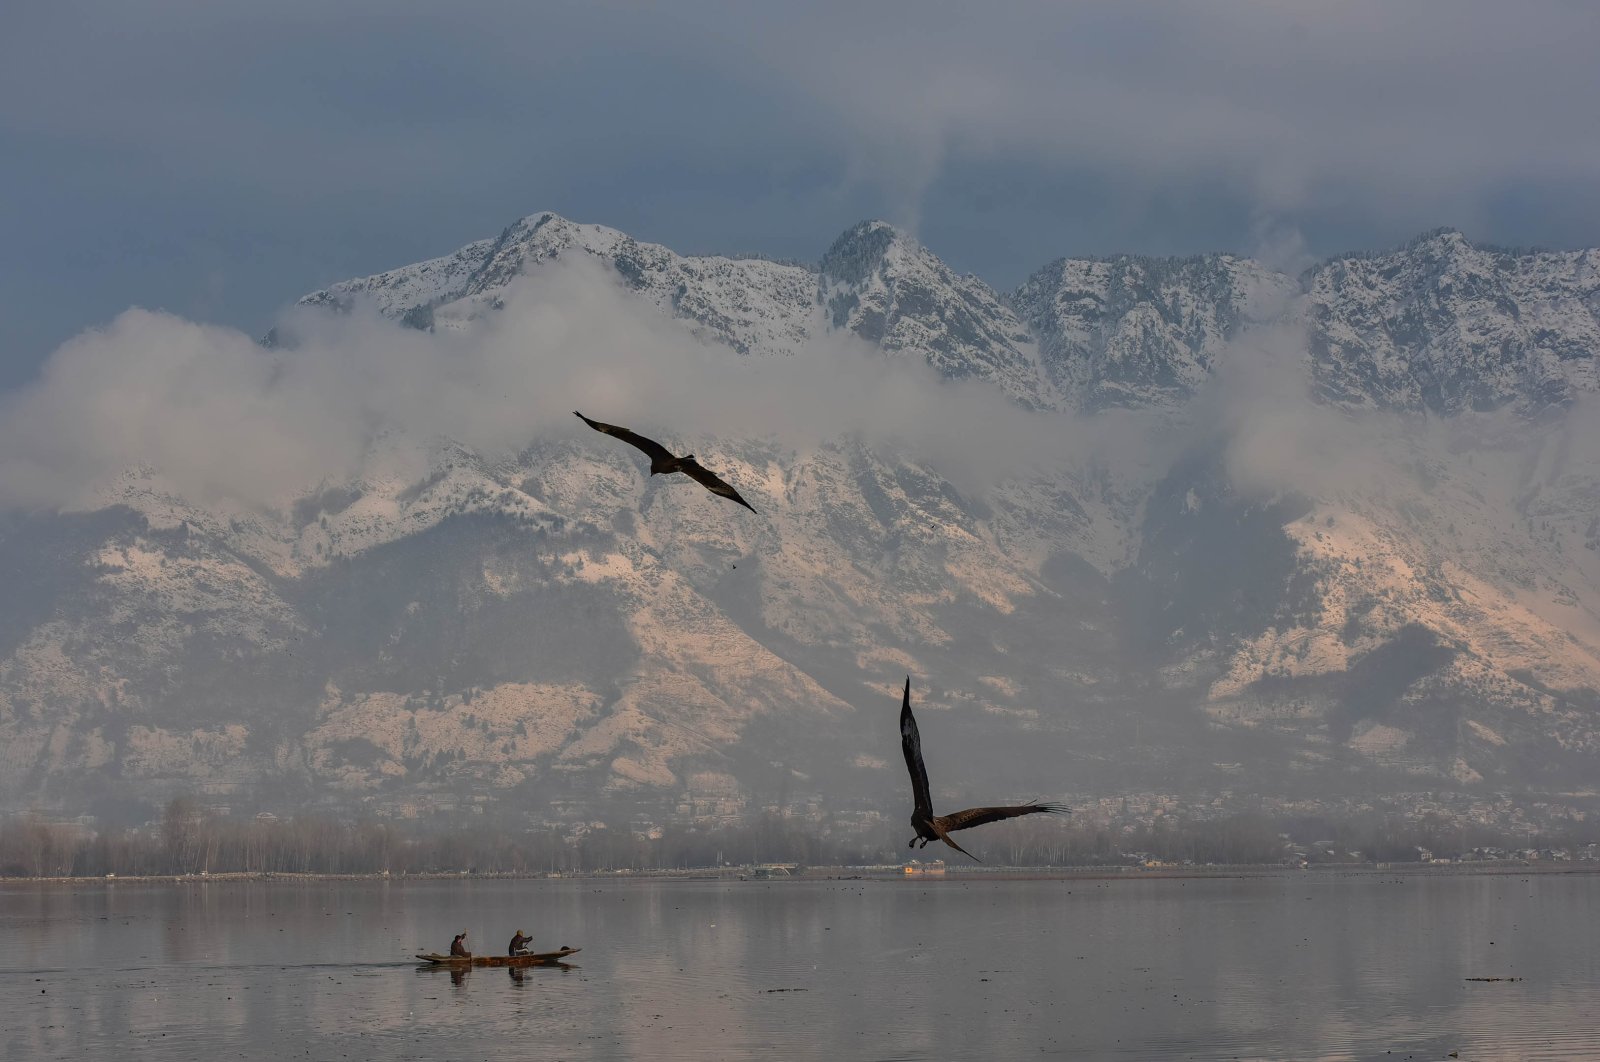 A boat ferries a passenger across the Dal lake with snow-covered mountains in the background during a winter day after fresh snowfall in Srinagar, Jammu and Kashmir, Jan. 31, 2023. (Getty Images Photo)